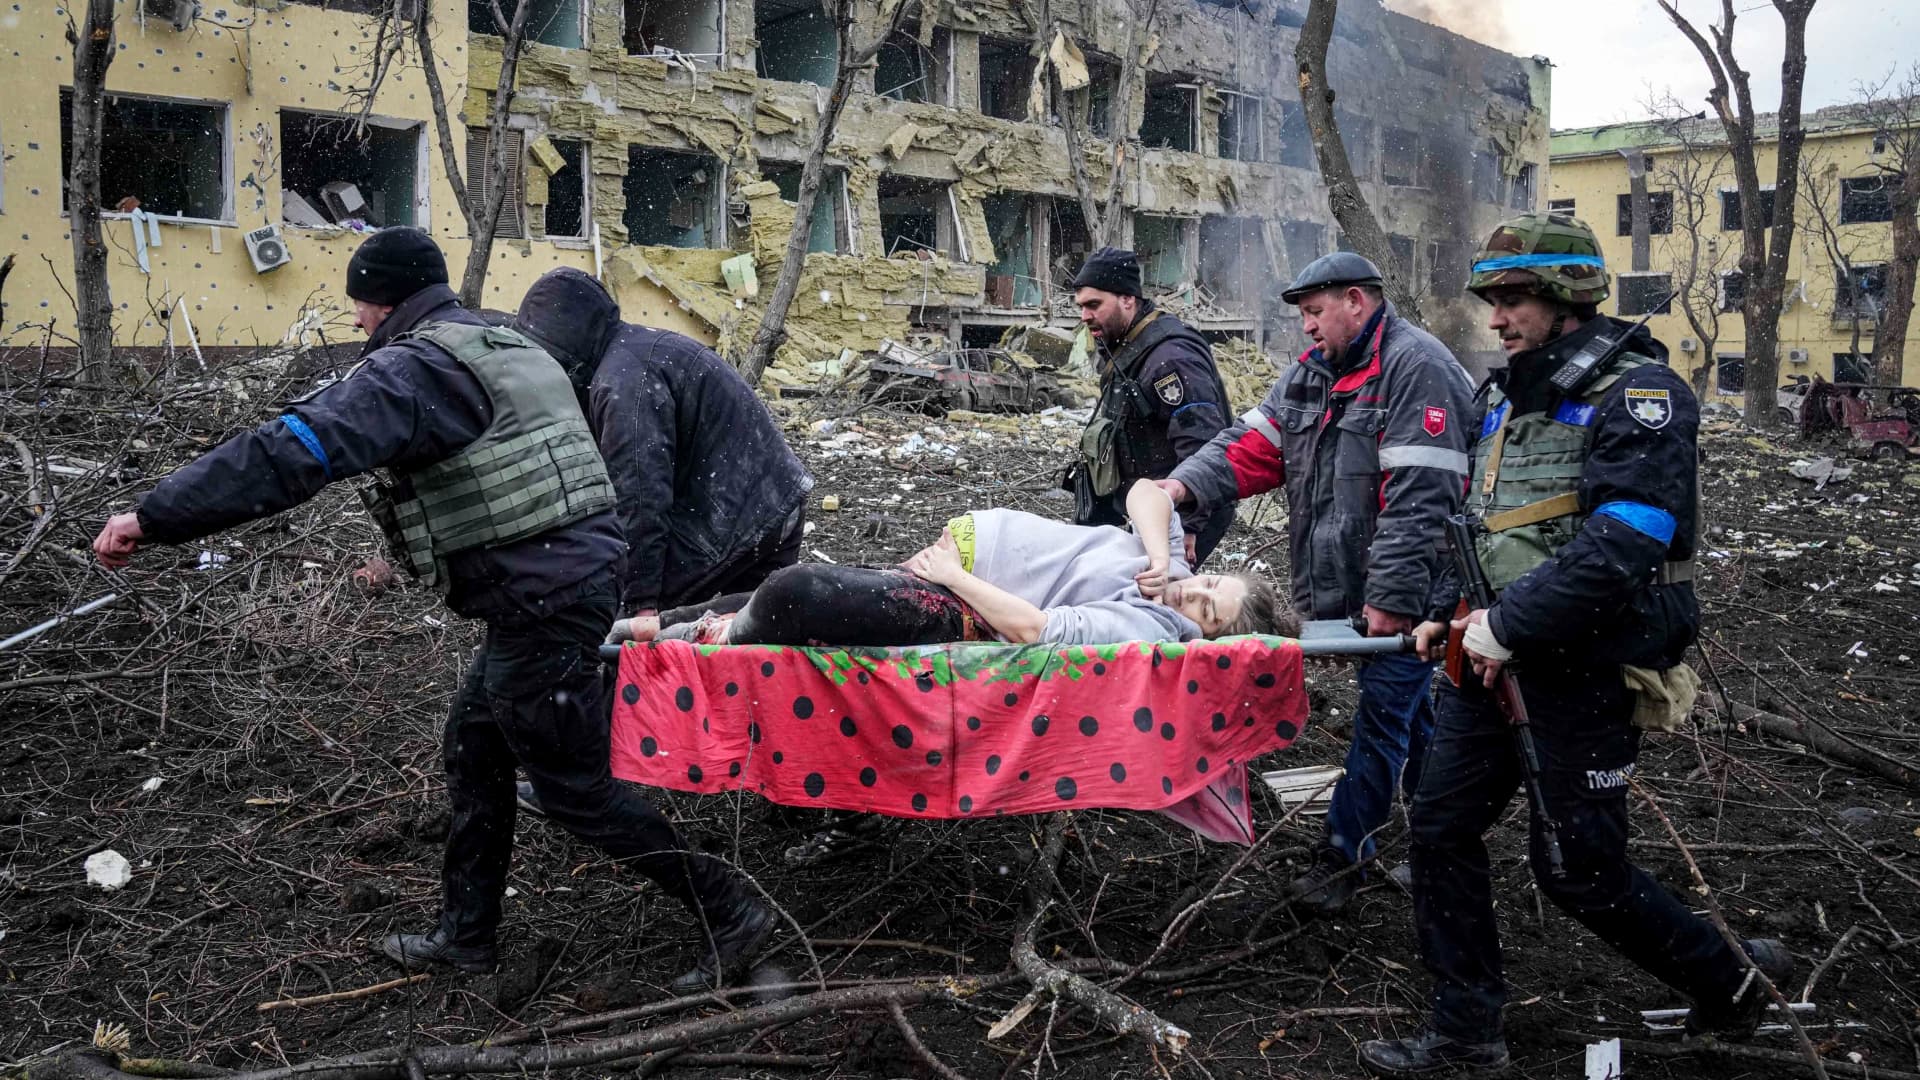 Ukrainian emergency employees and volunteers carry an injured pregnant woman from a maternity hospital that was damaged by shelling in Mariupol, Ukraine, Wednesday, March 9, 2022.